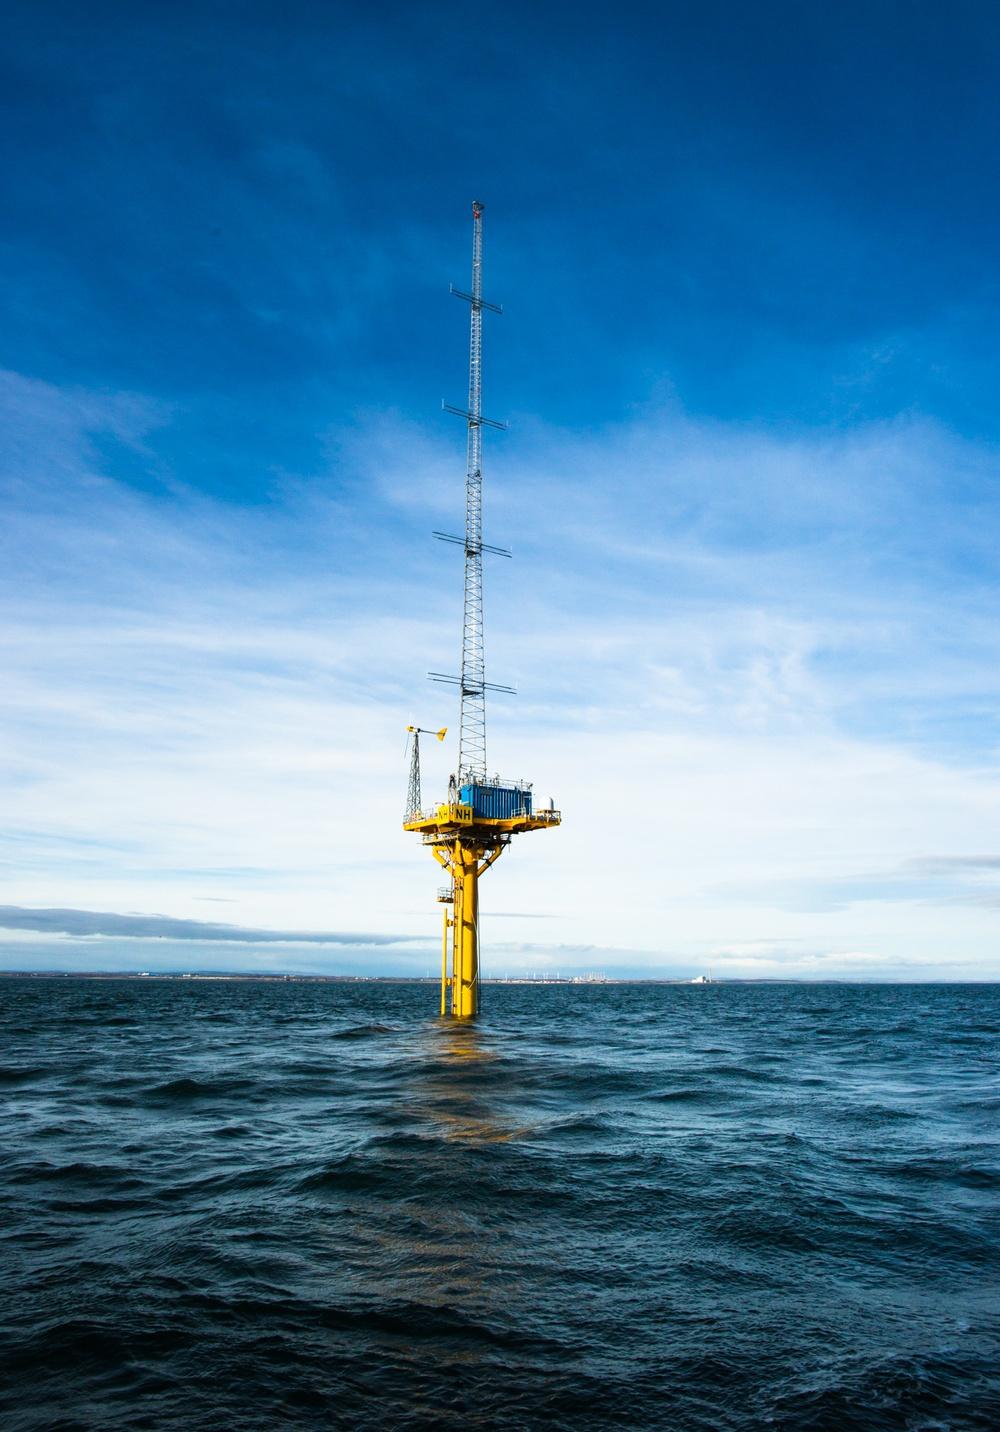 National Offshore Anemometry Hub, Blyth, ORE Catapult